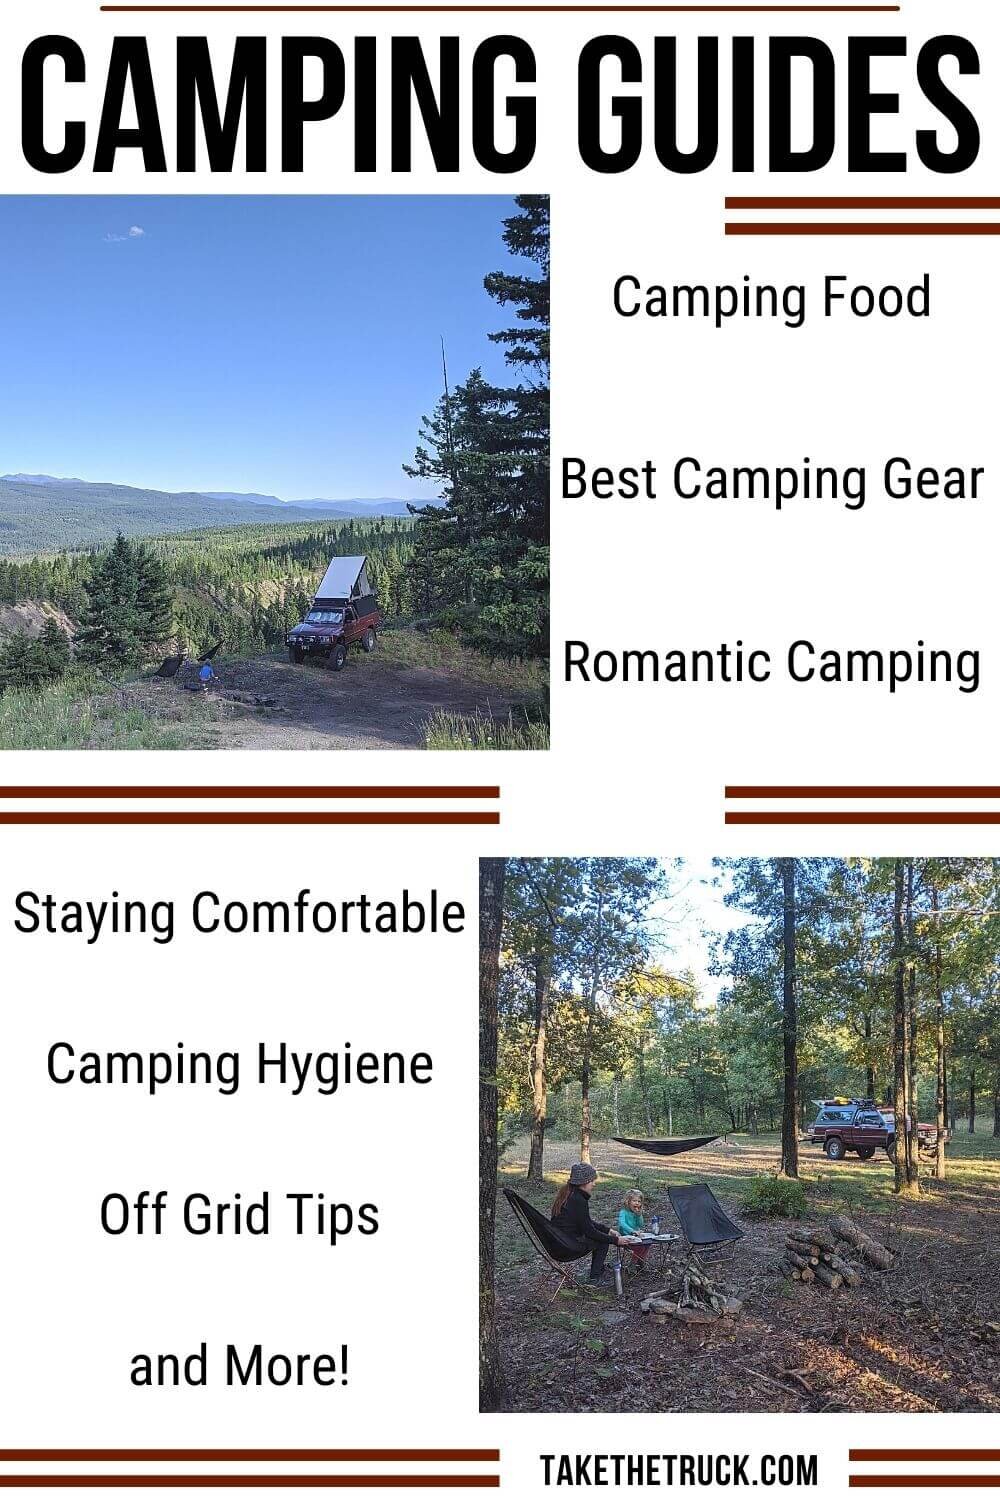 Whether you camp in a car, tent, van, truck, popup camper, travel trailer, or RV, this page has great posts on camping topics that can improve your camping game! Camping ideas for everyone!